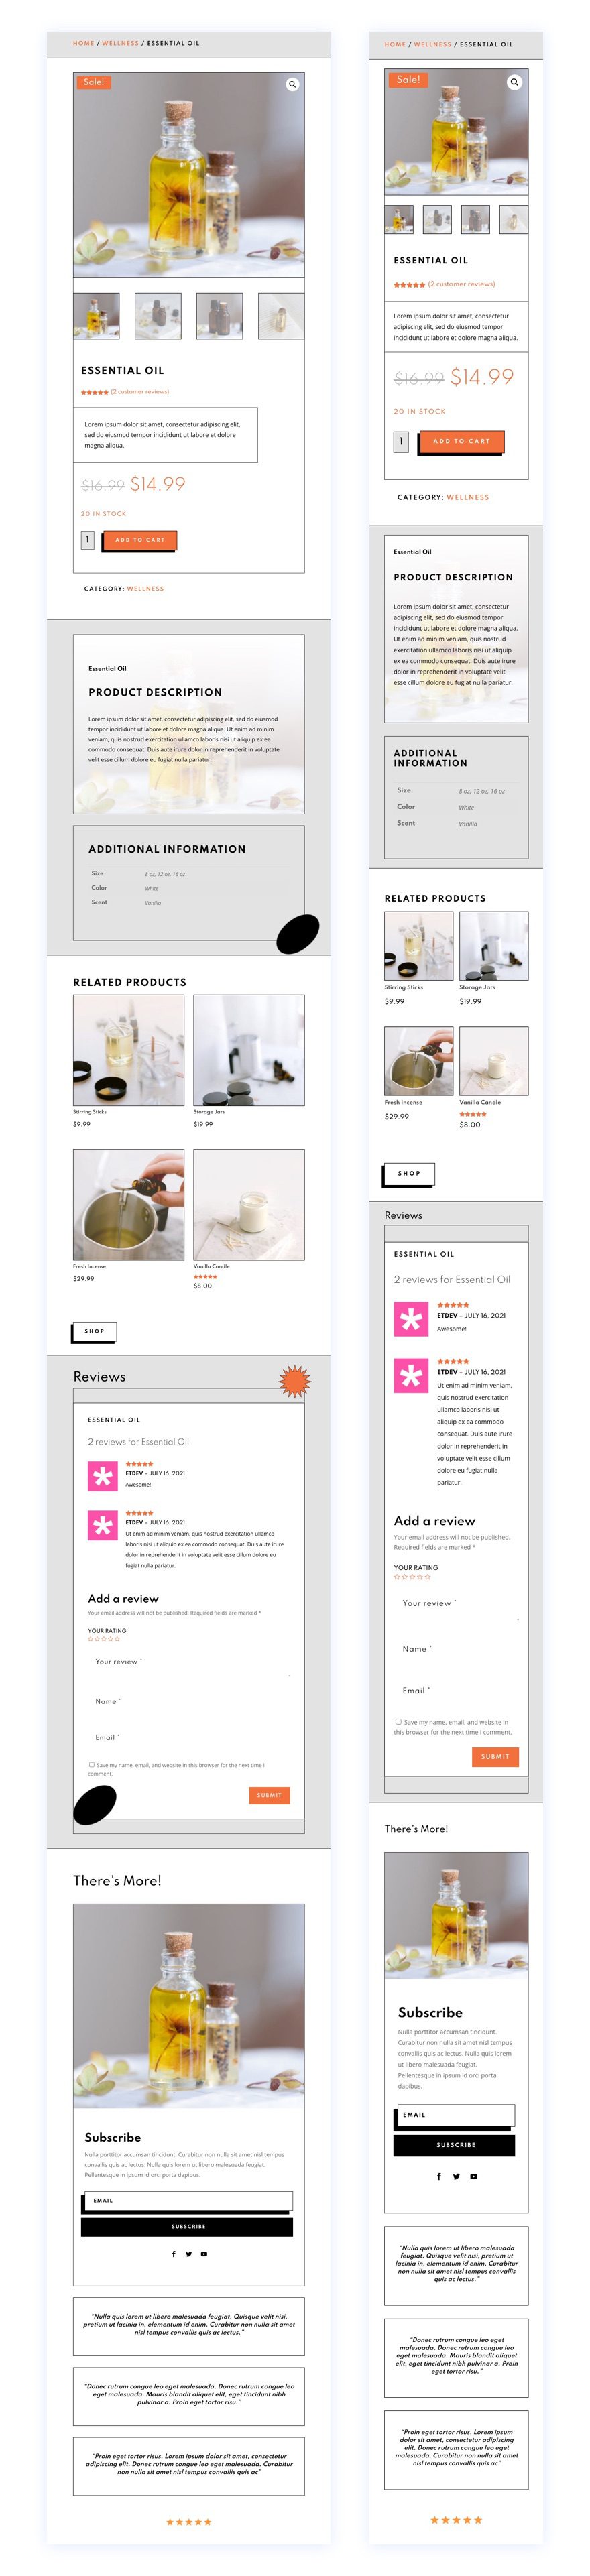 Product Page template for Divi's Essential Oils Layout Pack